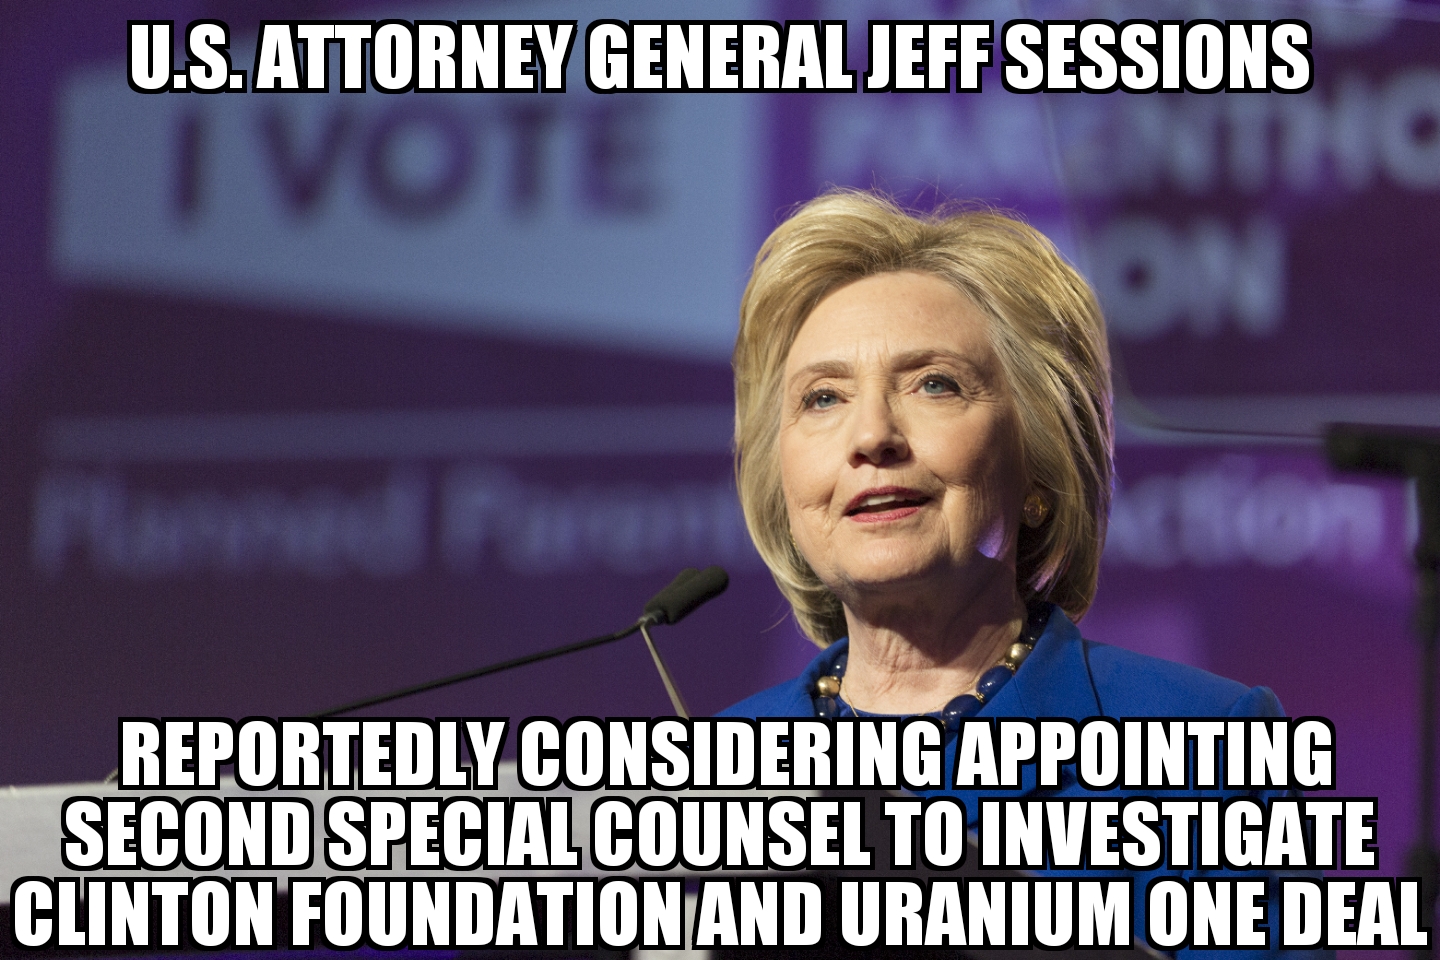 Sessions considering second special counsel to investigate Clinton Foundation